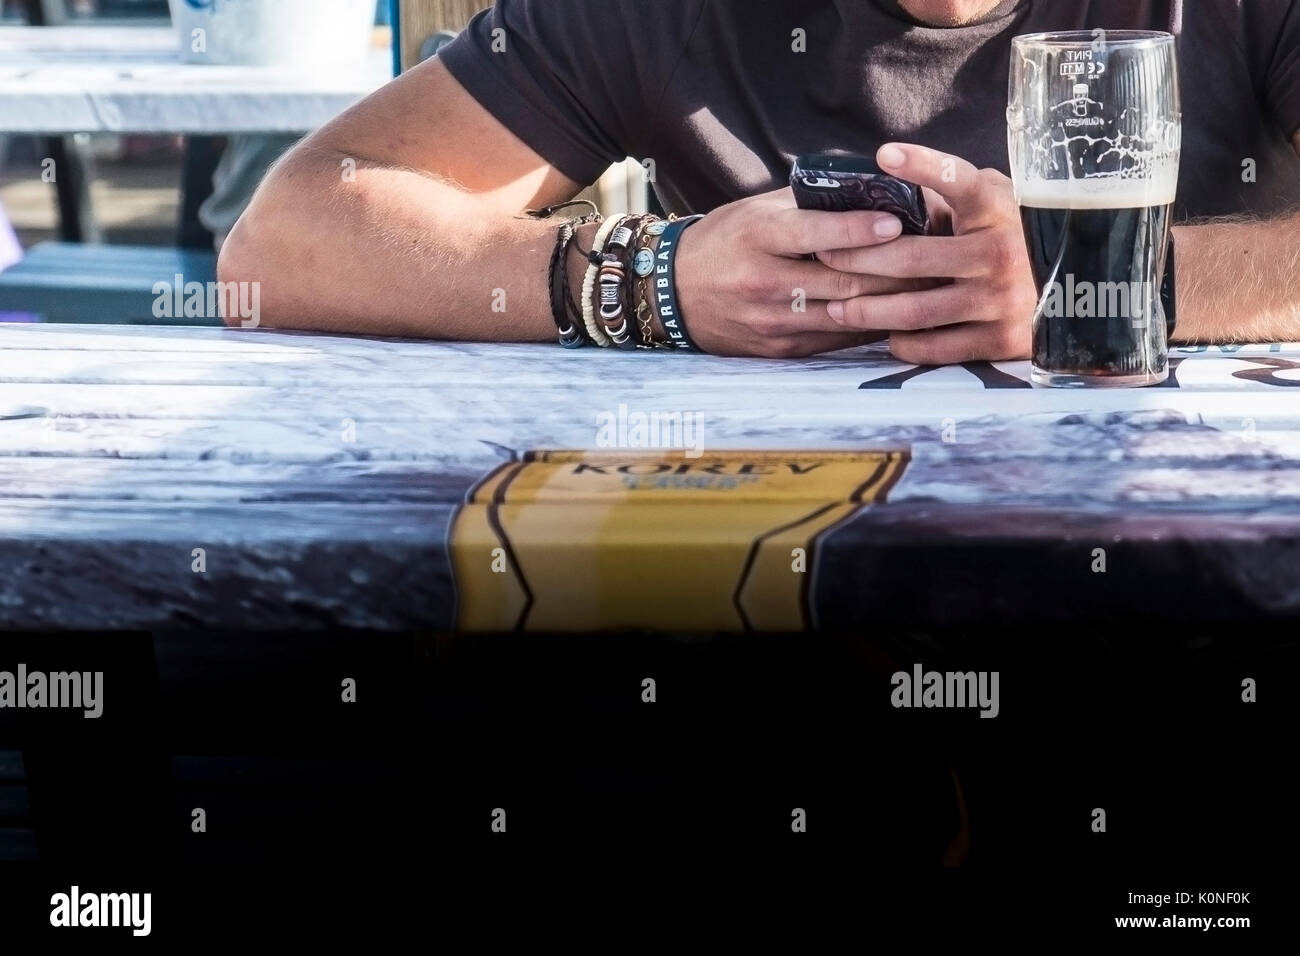 A man sitting at a table using his smartphone and wearing various bracelets on his arm. Stock Photo